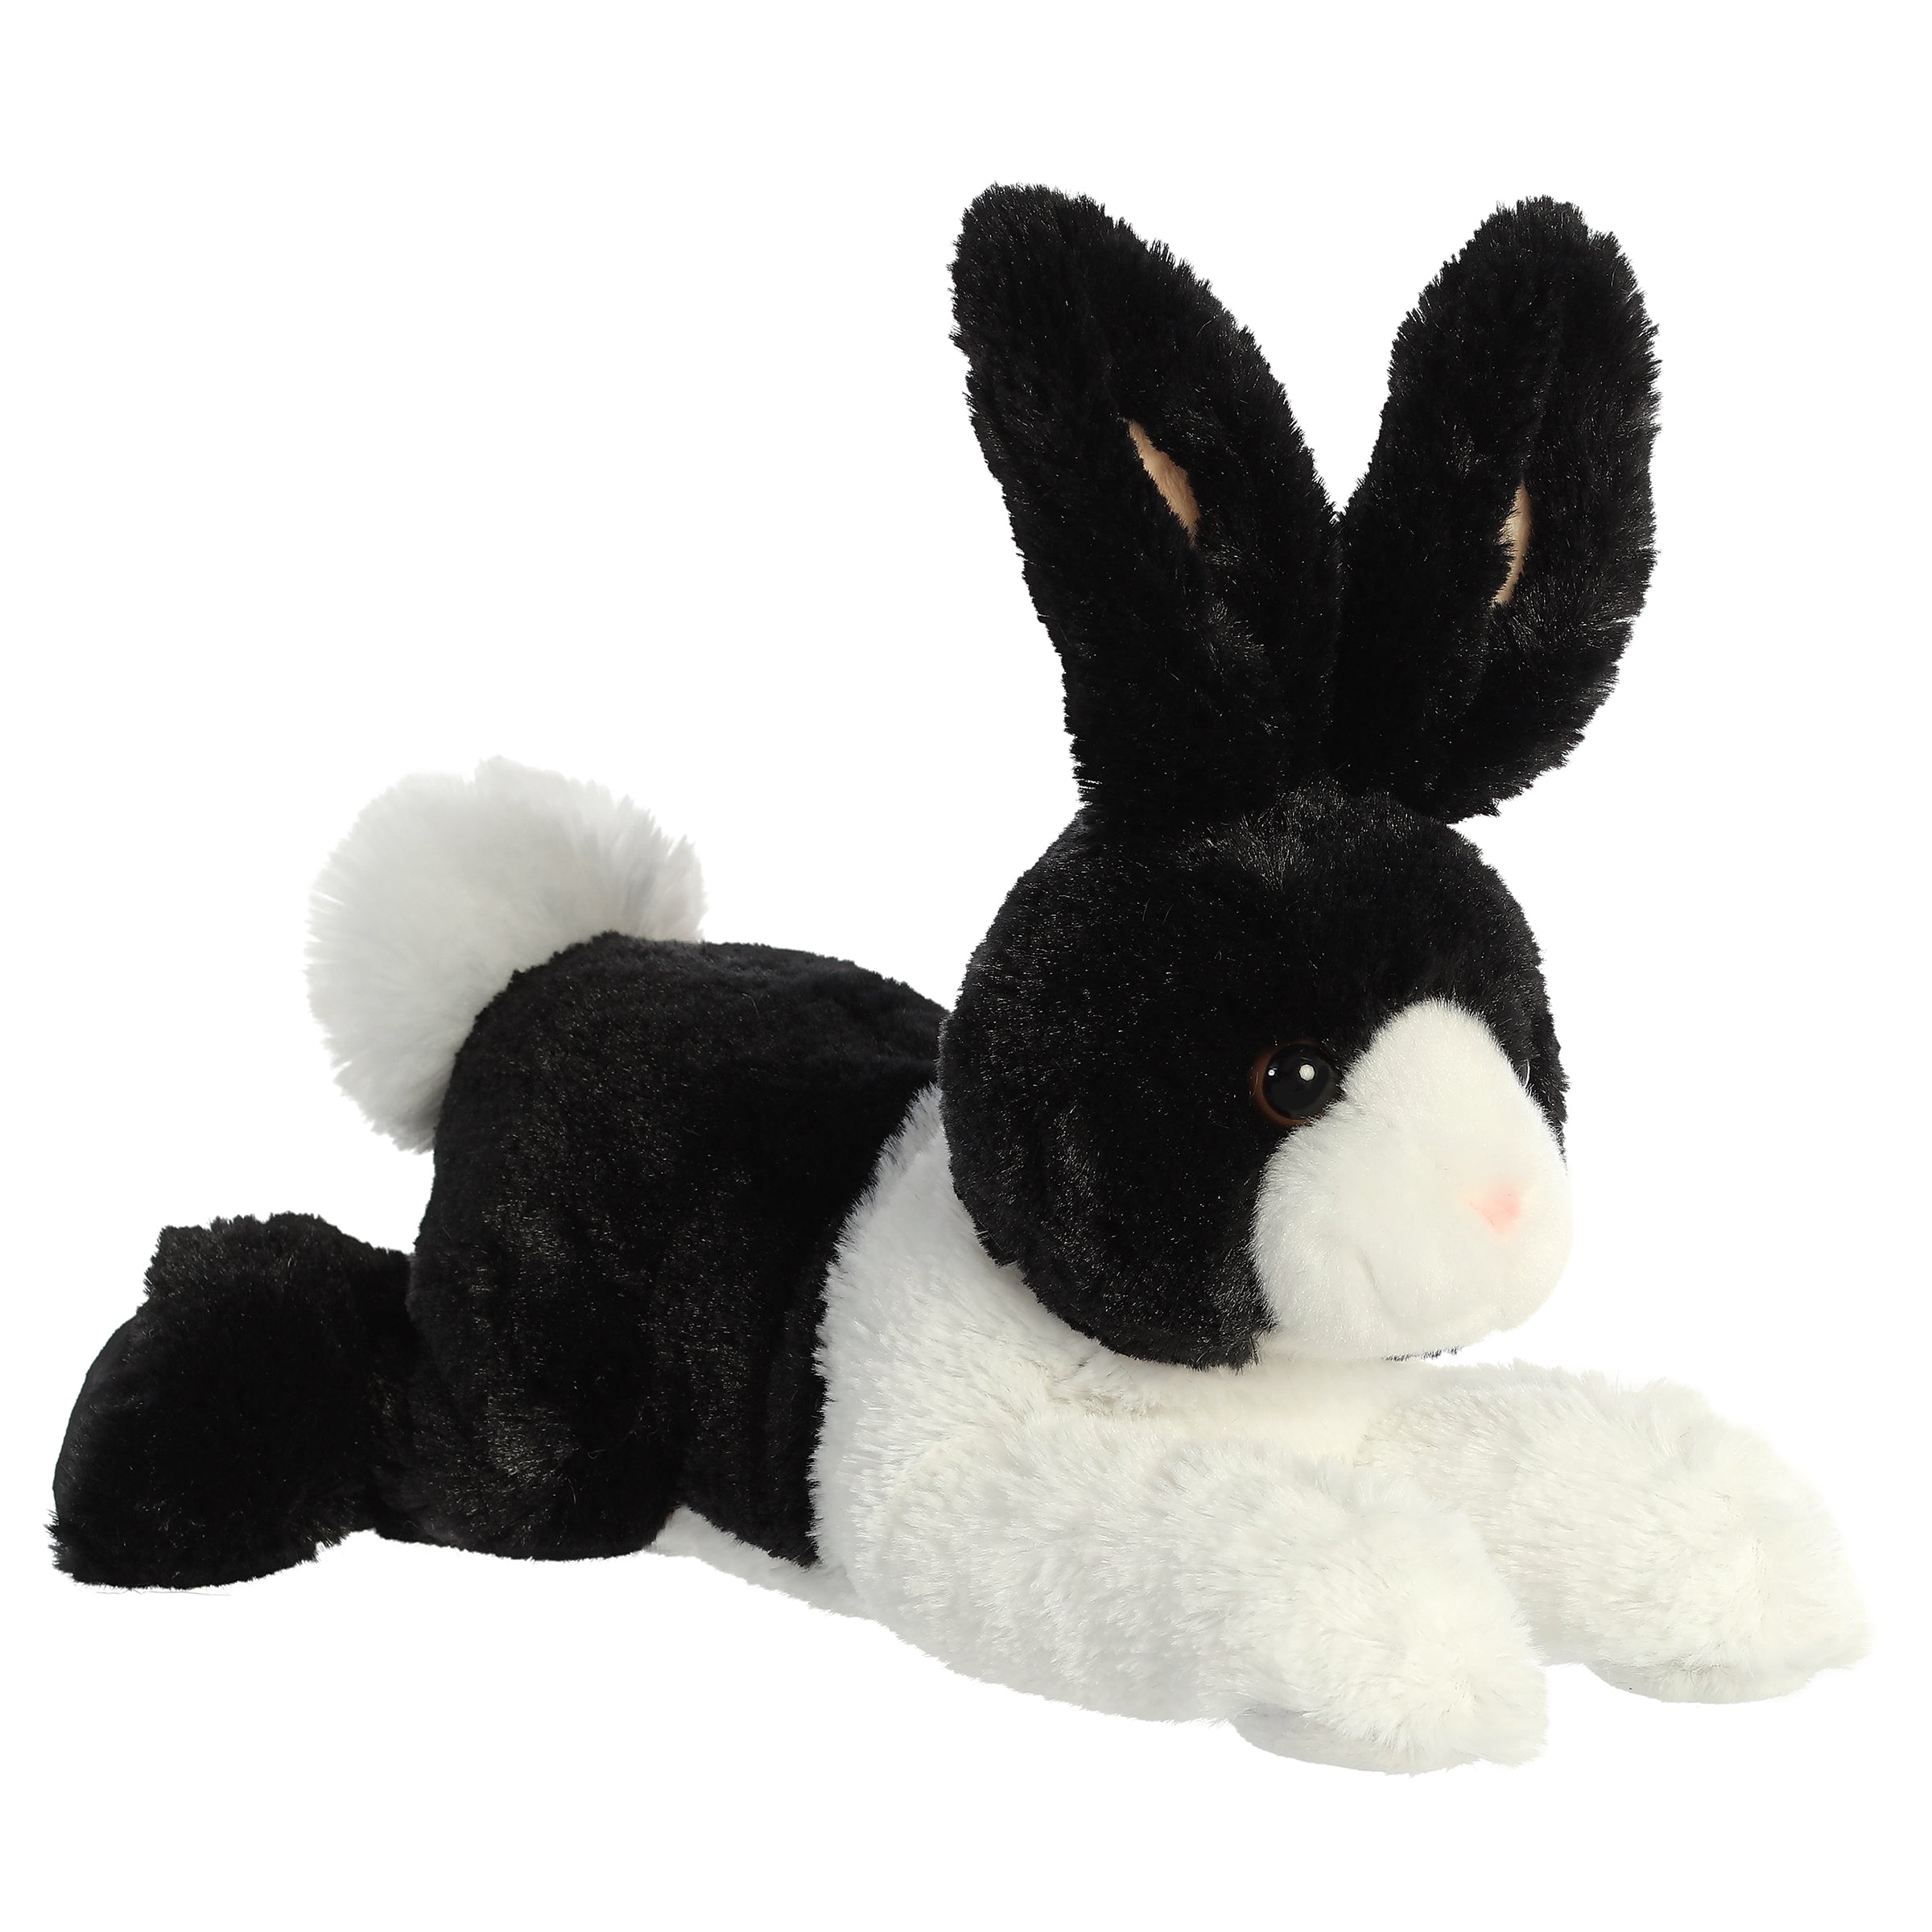 Flopsie Dutch Rabbit Plush, black and white fur, bright eyes, mimics Dutch Rabbit breed, ideal for hugs and collections.